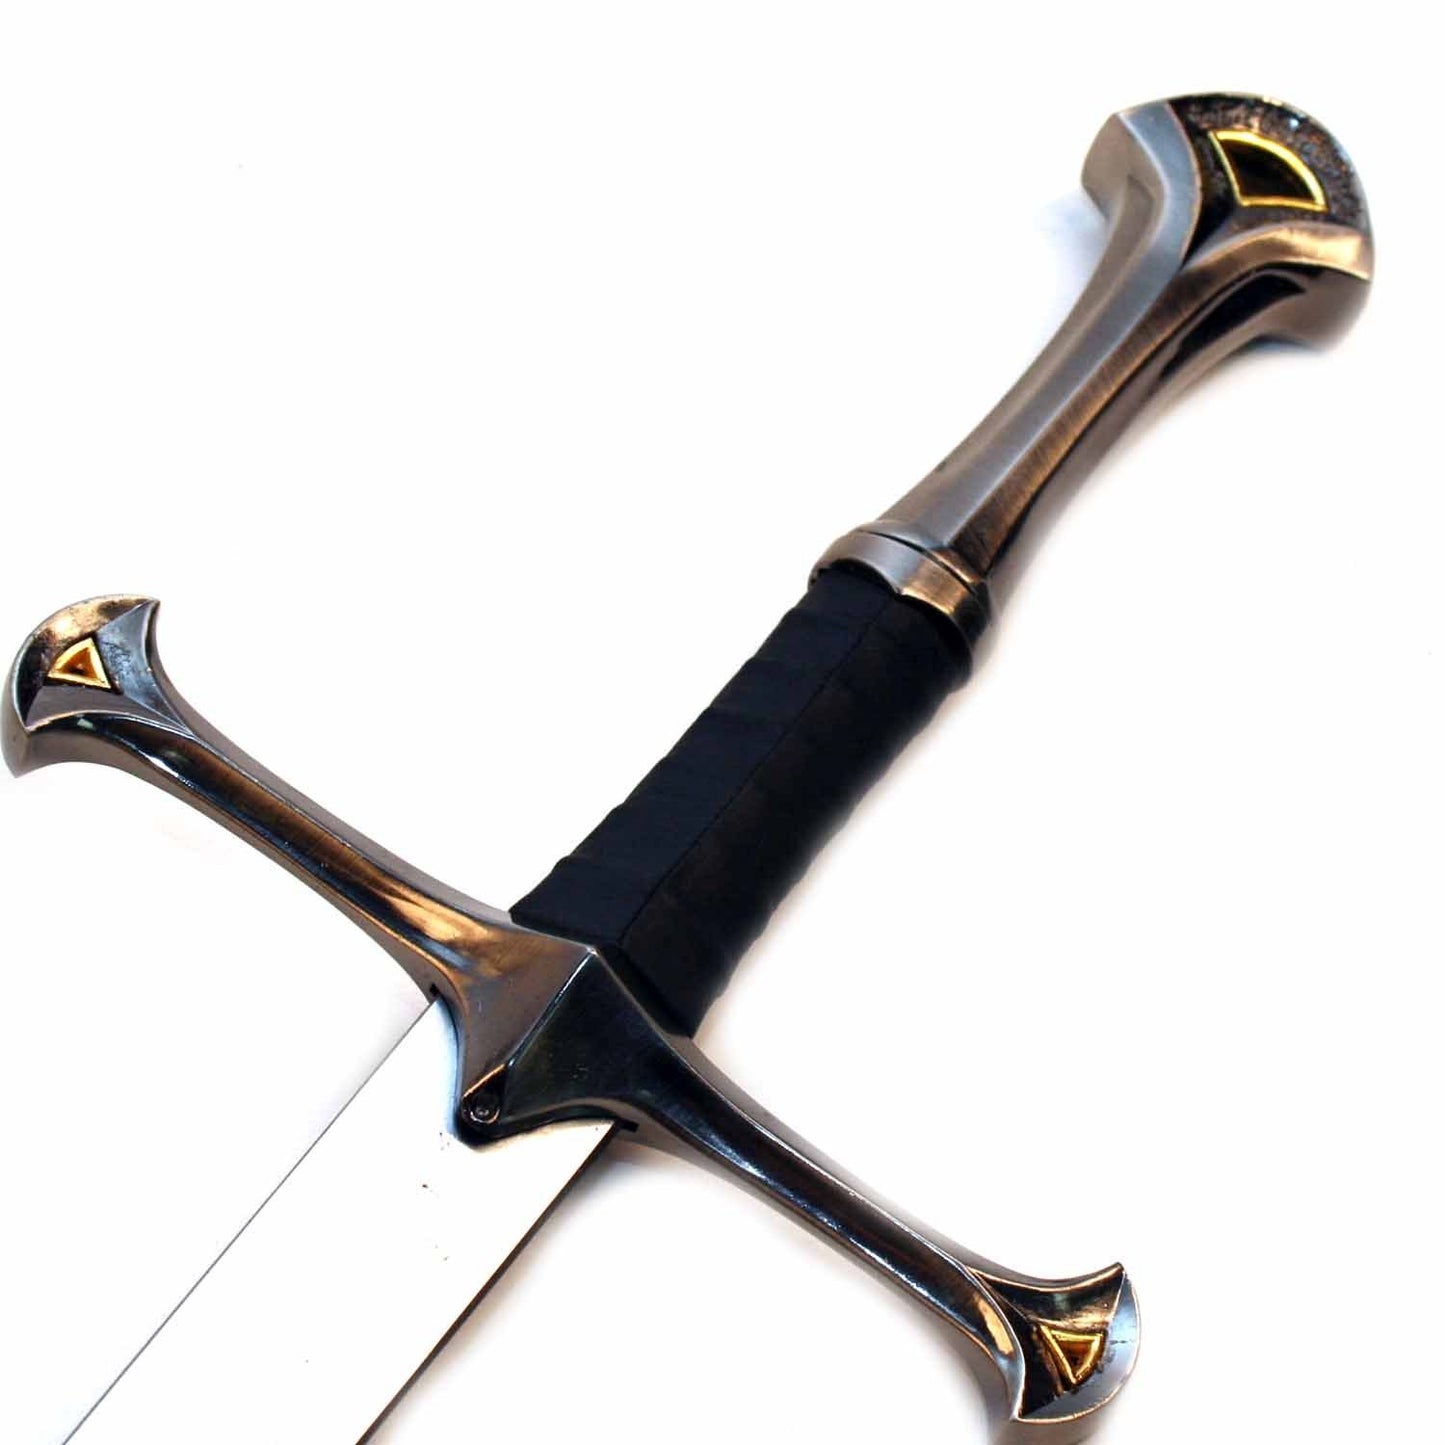 Medieval Knight Arming Sword with Scabbard (Oakeshotte Type XVIIIb)